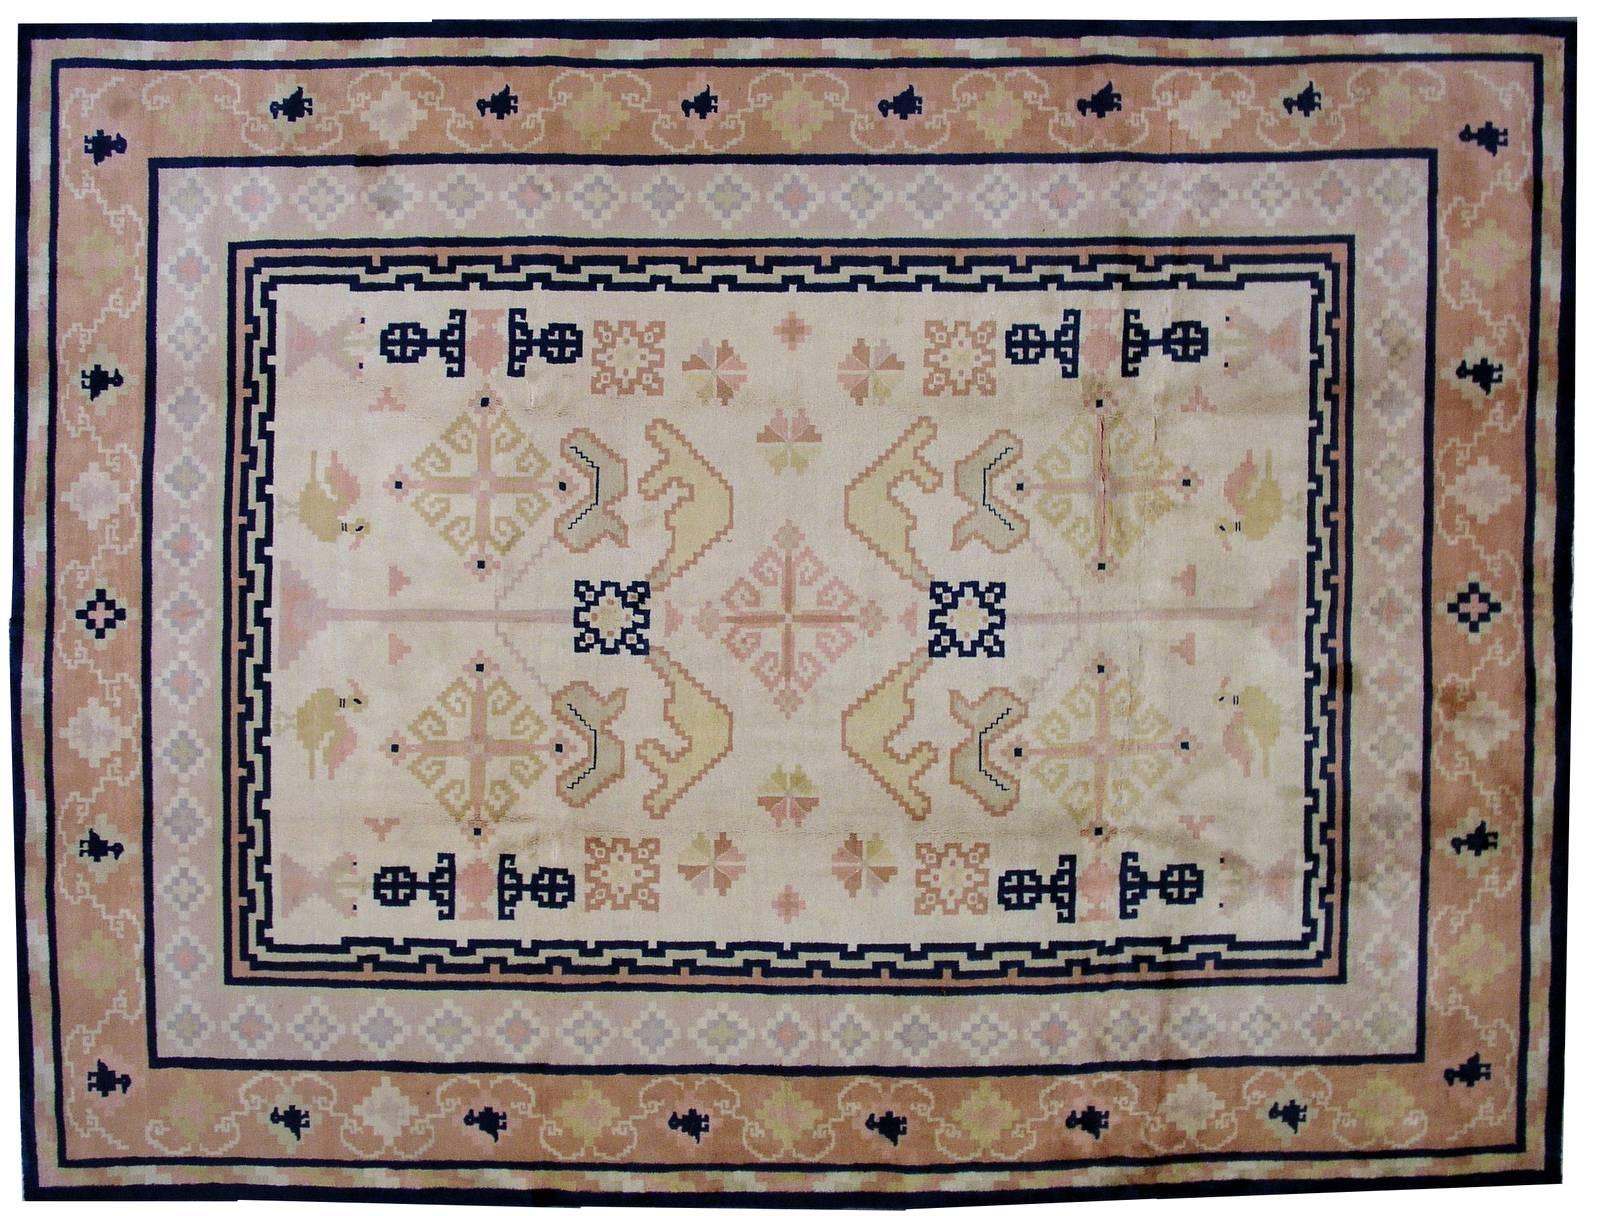 Antique Fete Chinese rug in original condition. The rug made in in soft pastel shades of peach, purple, beige and yellow, strong navy blue color is very contrasted on the details of the rug. The pattern on the rug is geometric which is quite unusual